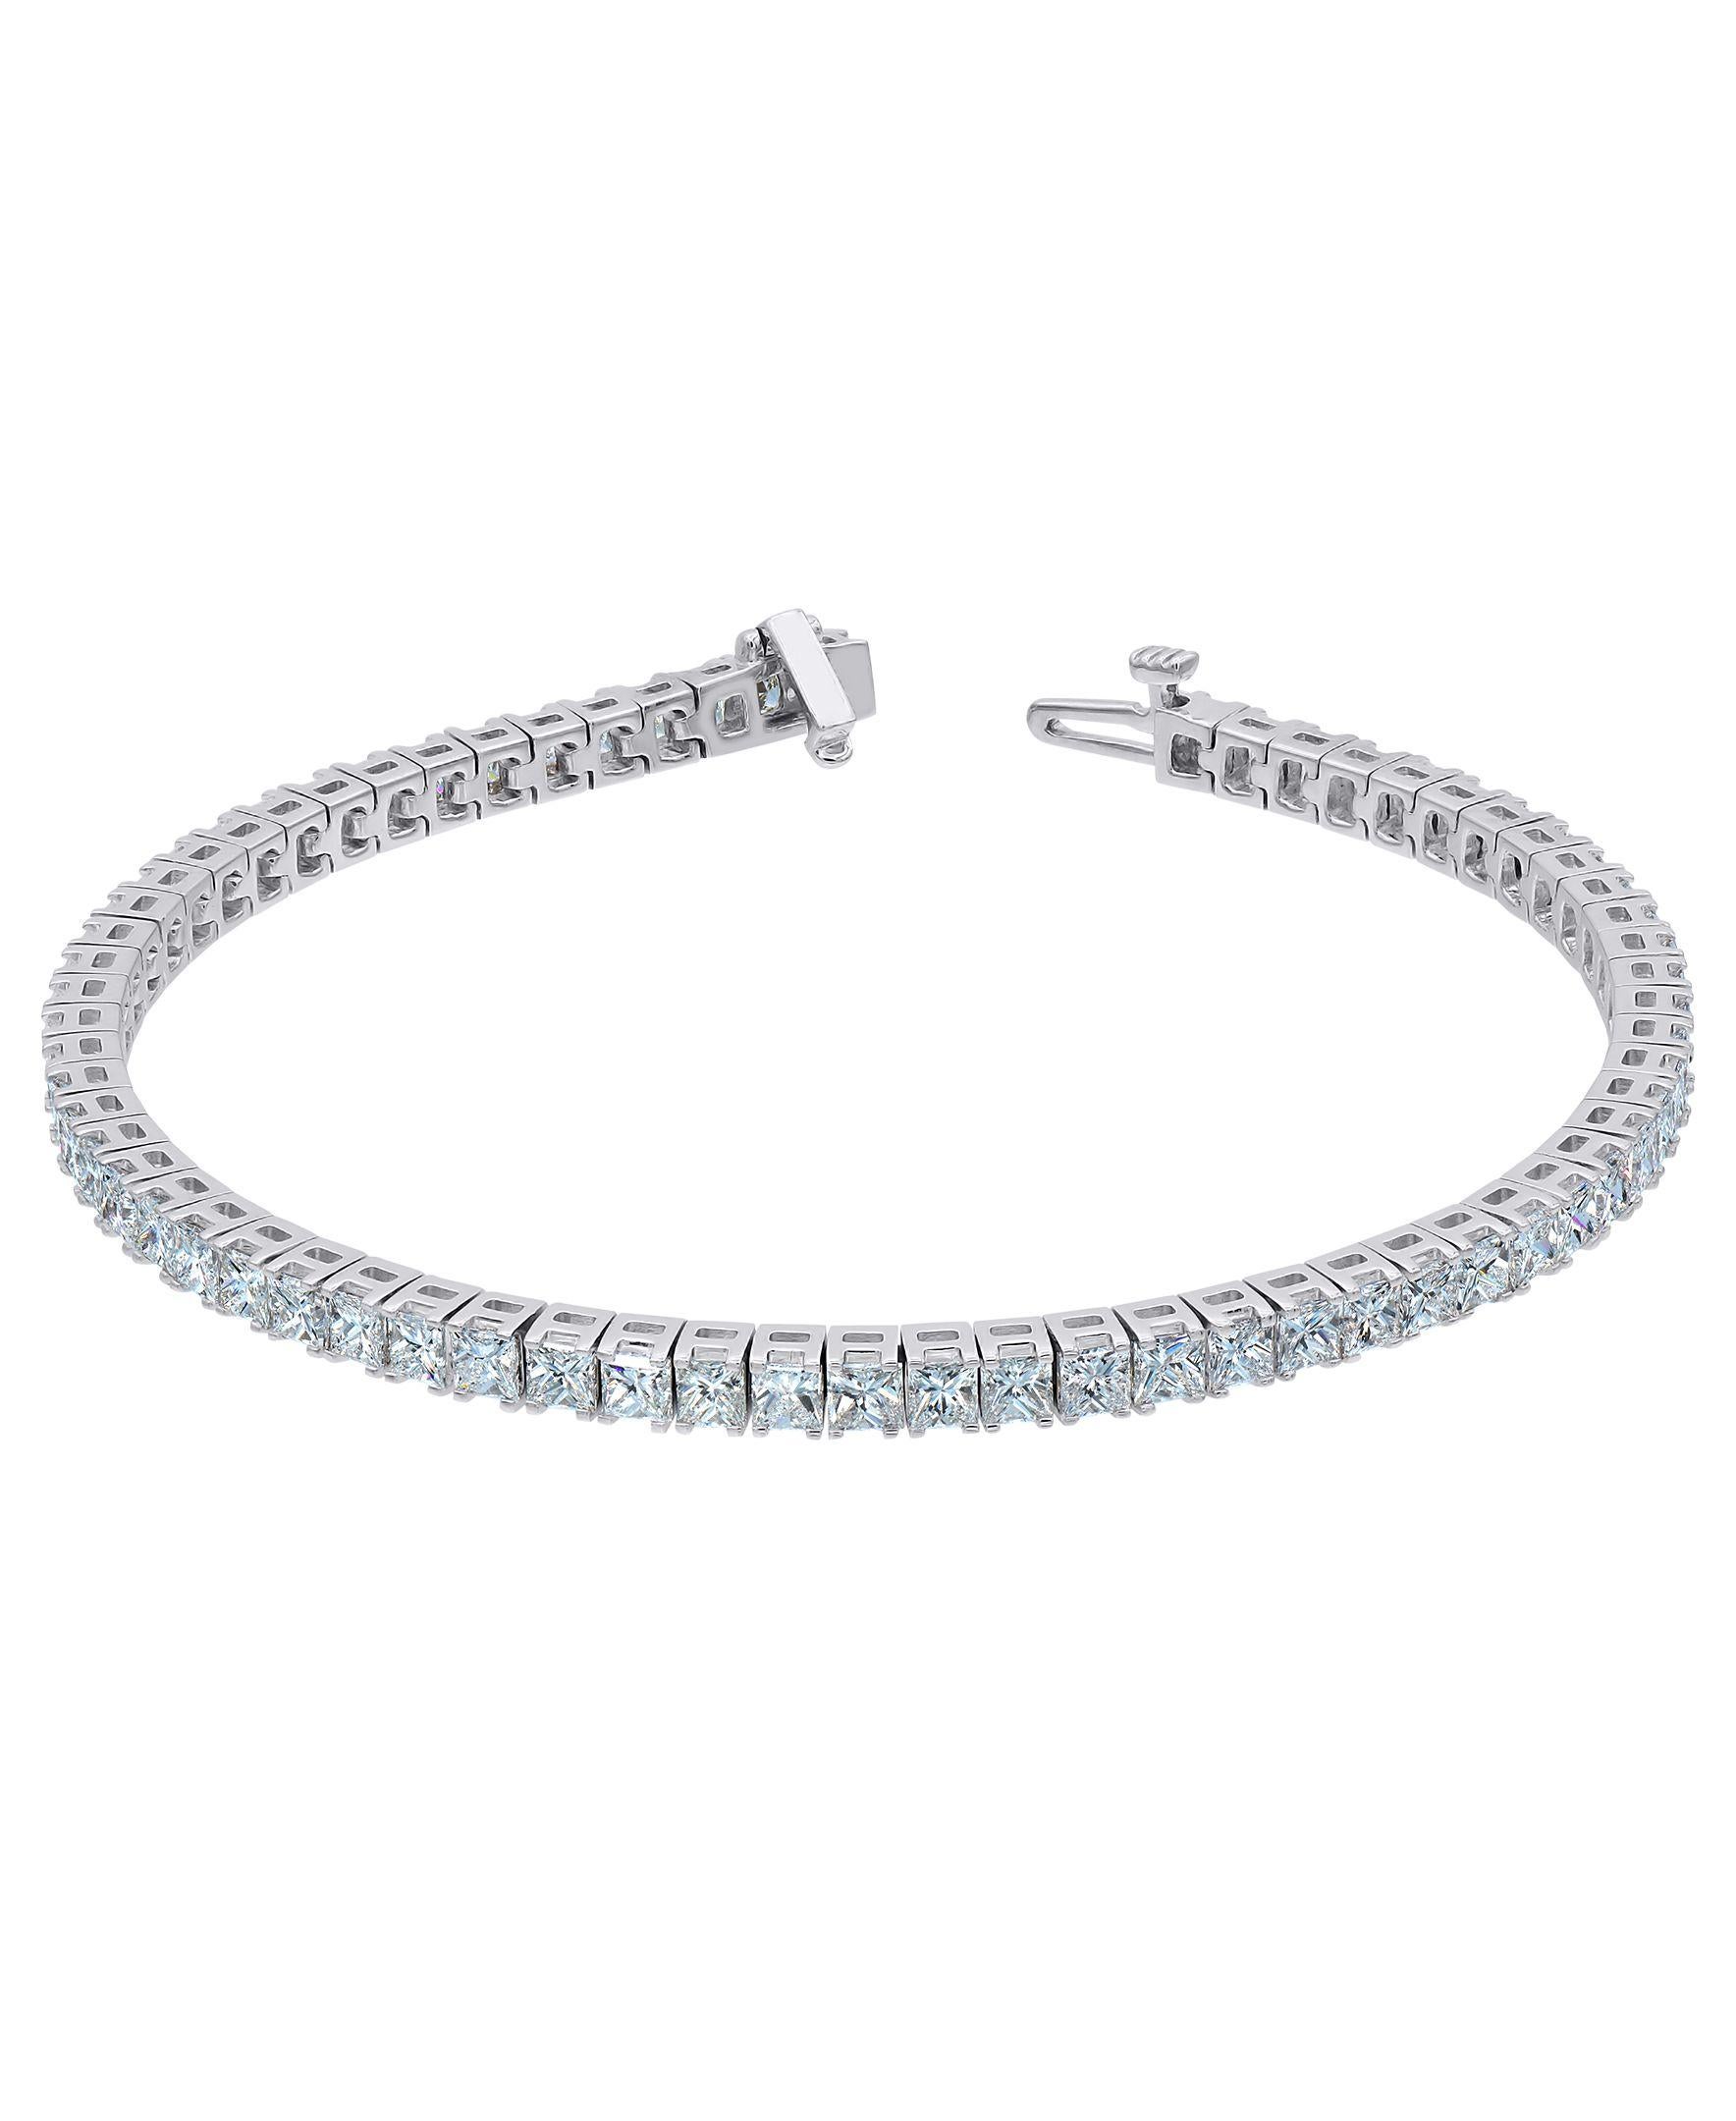 Take your look from ready to glow with this marvelous diamond tennis bracelet. Crafted in cool 14K white gold, this shimmering line of 1/4 ct. diamonds elevate any look with sparkle showcasing a row of dazzling diamonds((H-I, VS2). Breathtaking with